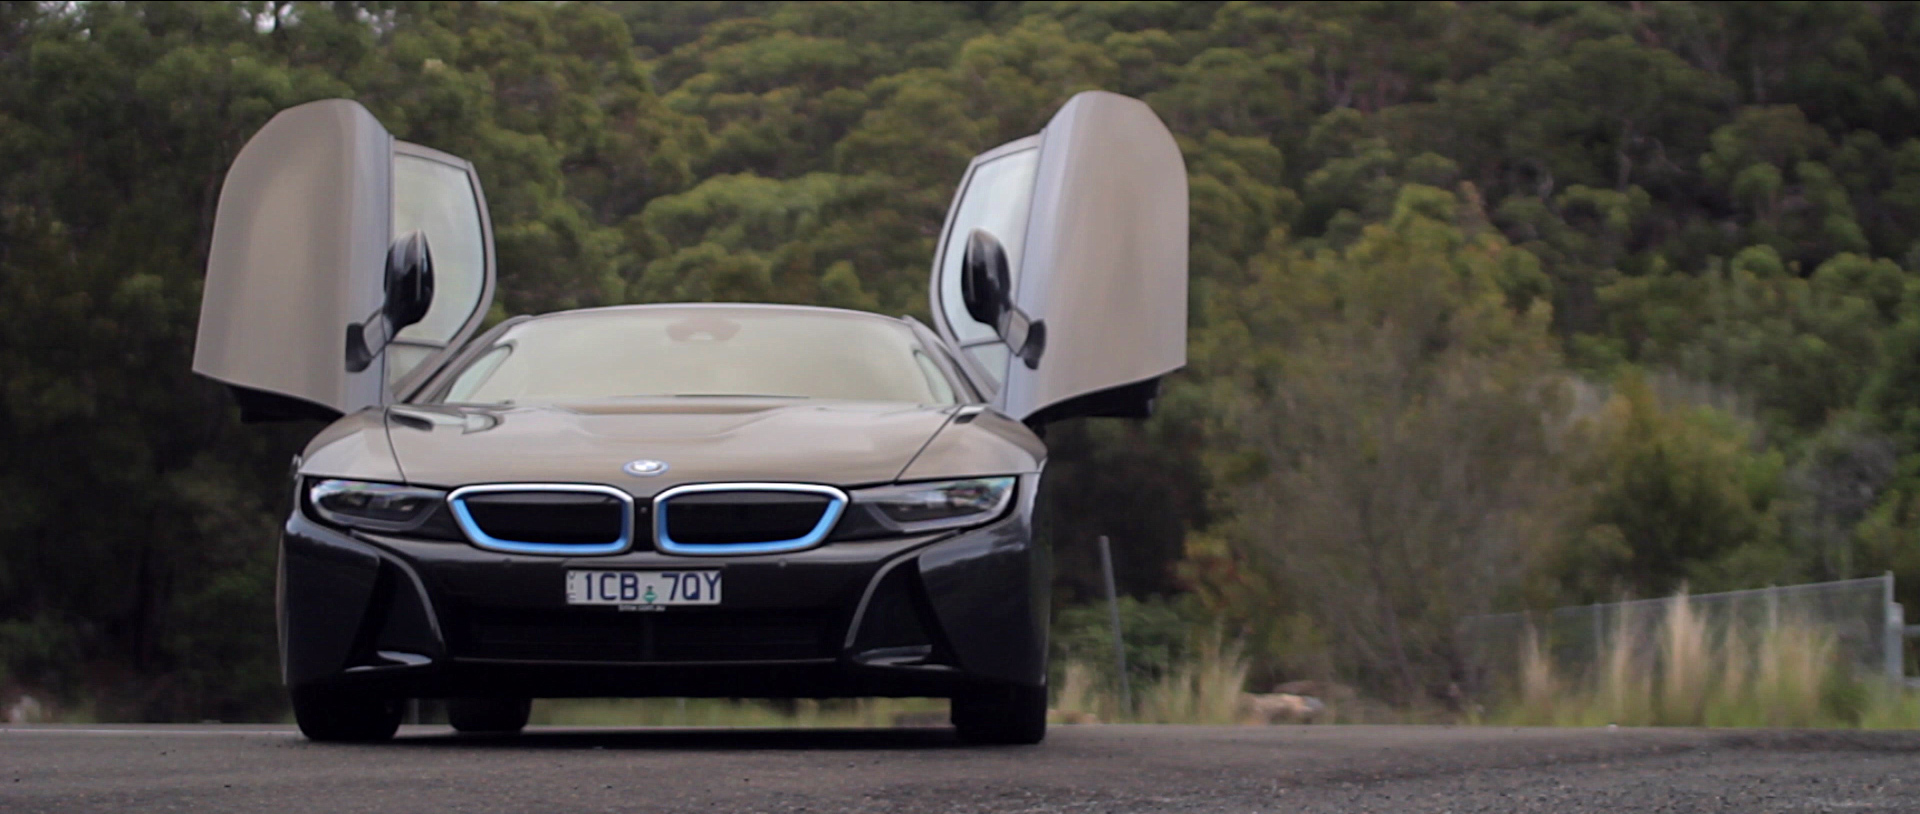 Bmw I8 Hybrid Review — Auto Expert By John Cadogan - Save Thousands On Your  Next New Car!